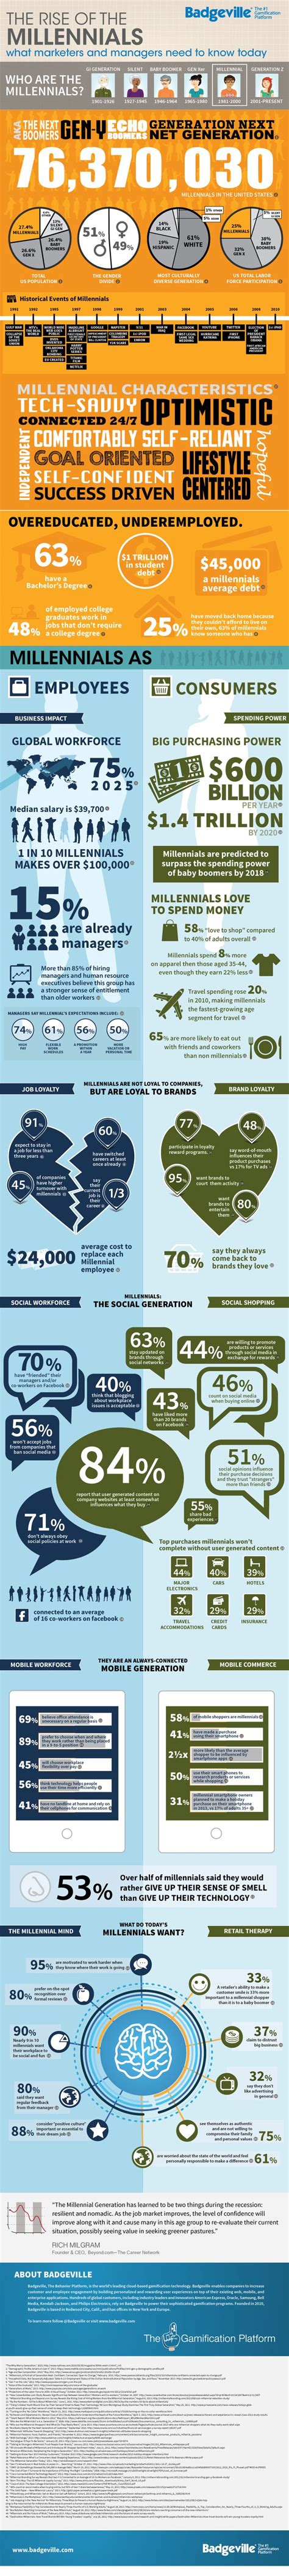 The Rise Of The Millennials Infographic Infographic Social Media